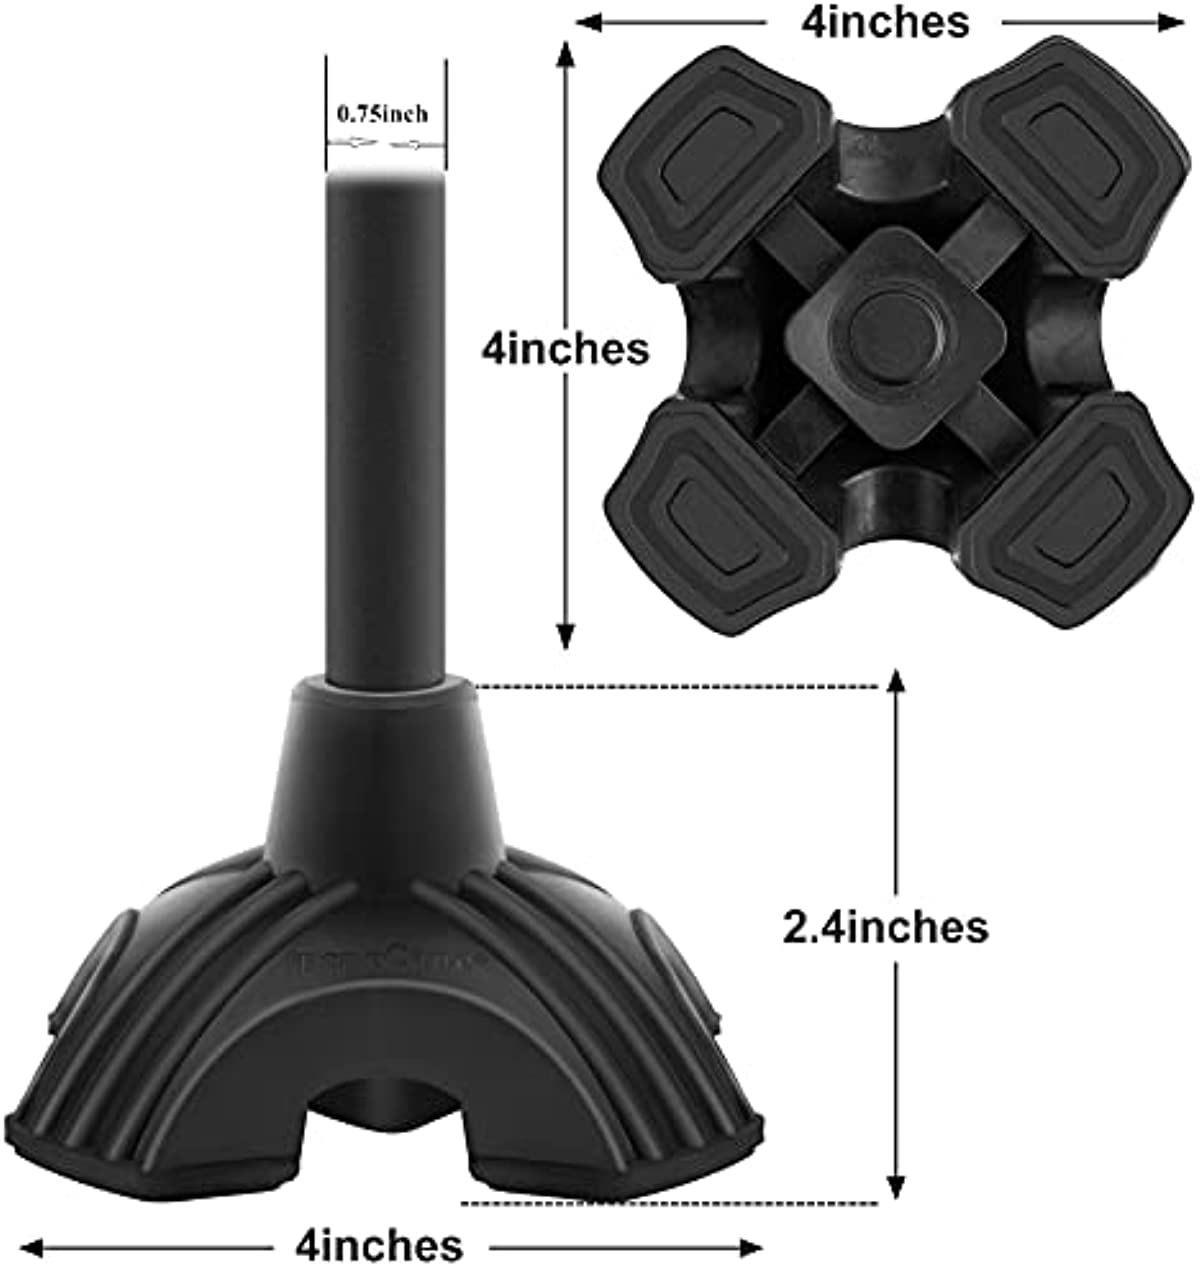 BeneCane Cane Tip - Self Standing Quad Base Replacement for Walking Cane,4 Prong Rubber Cane Foot Pad